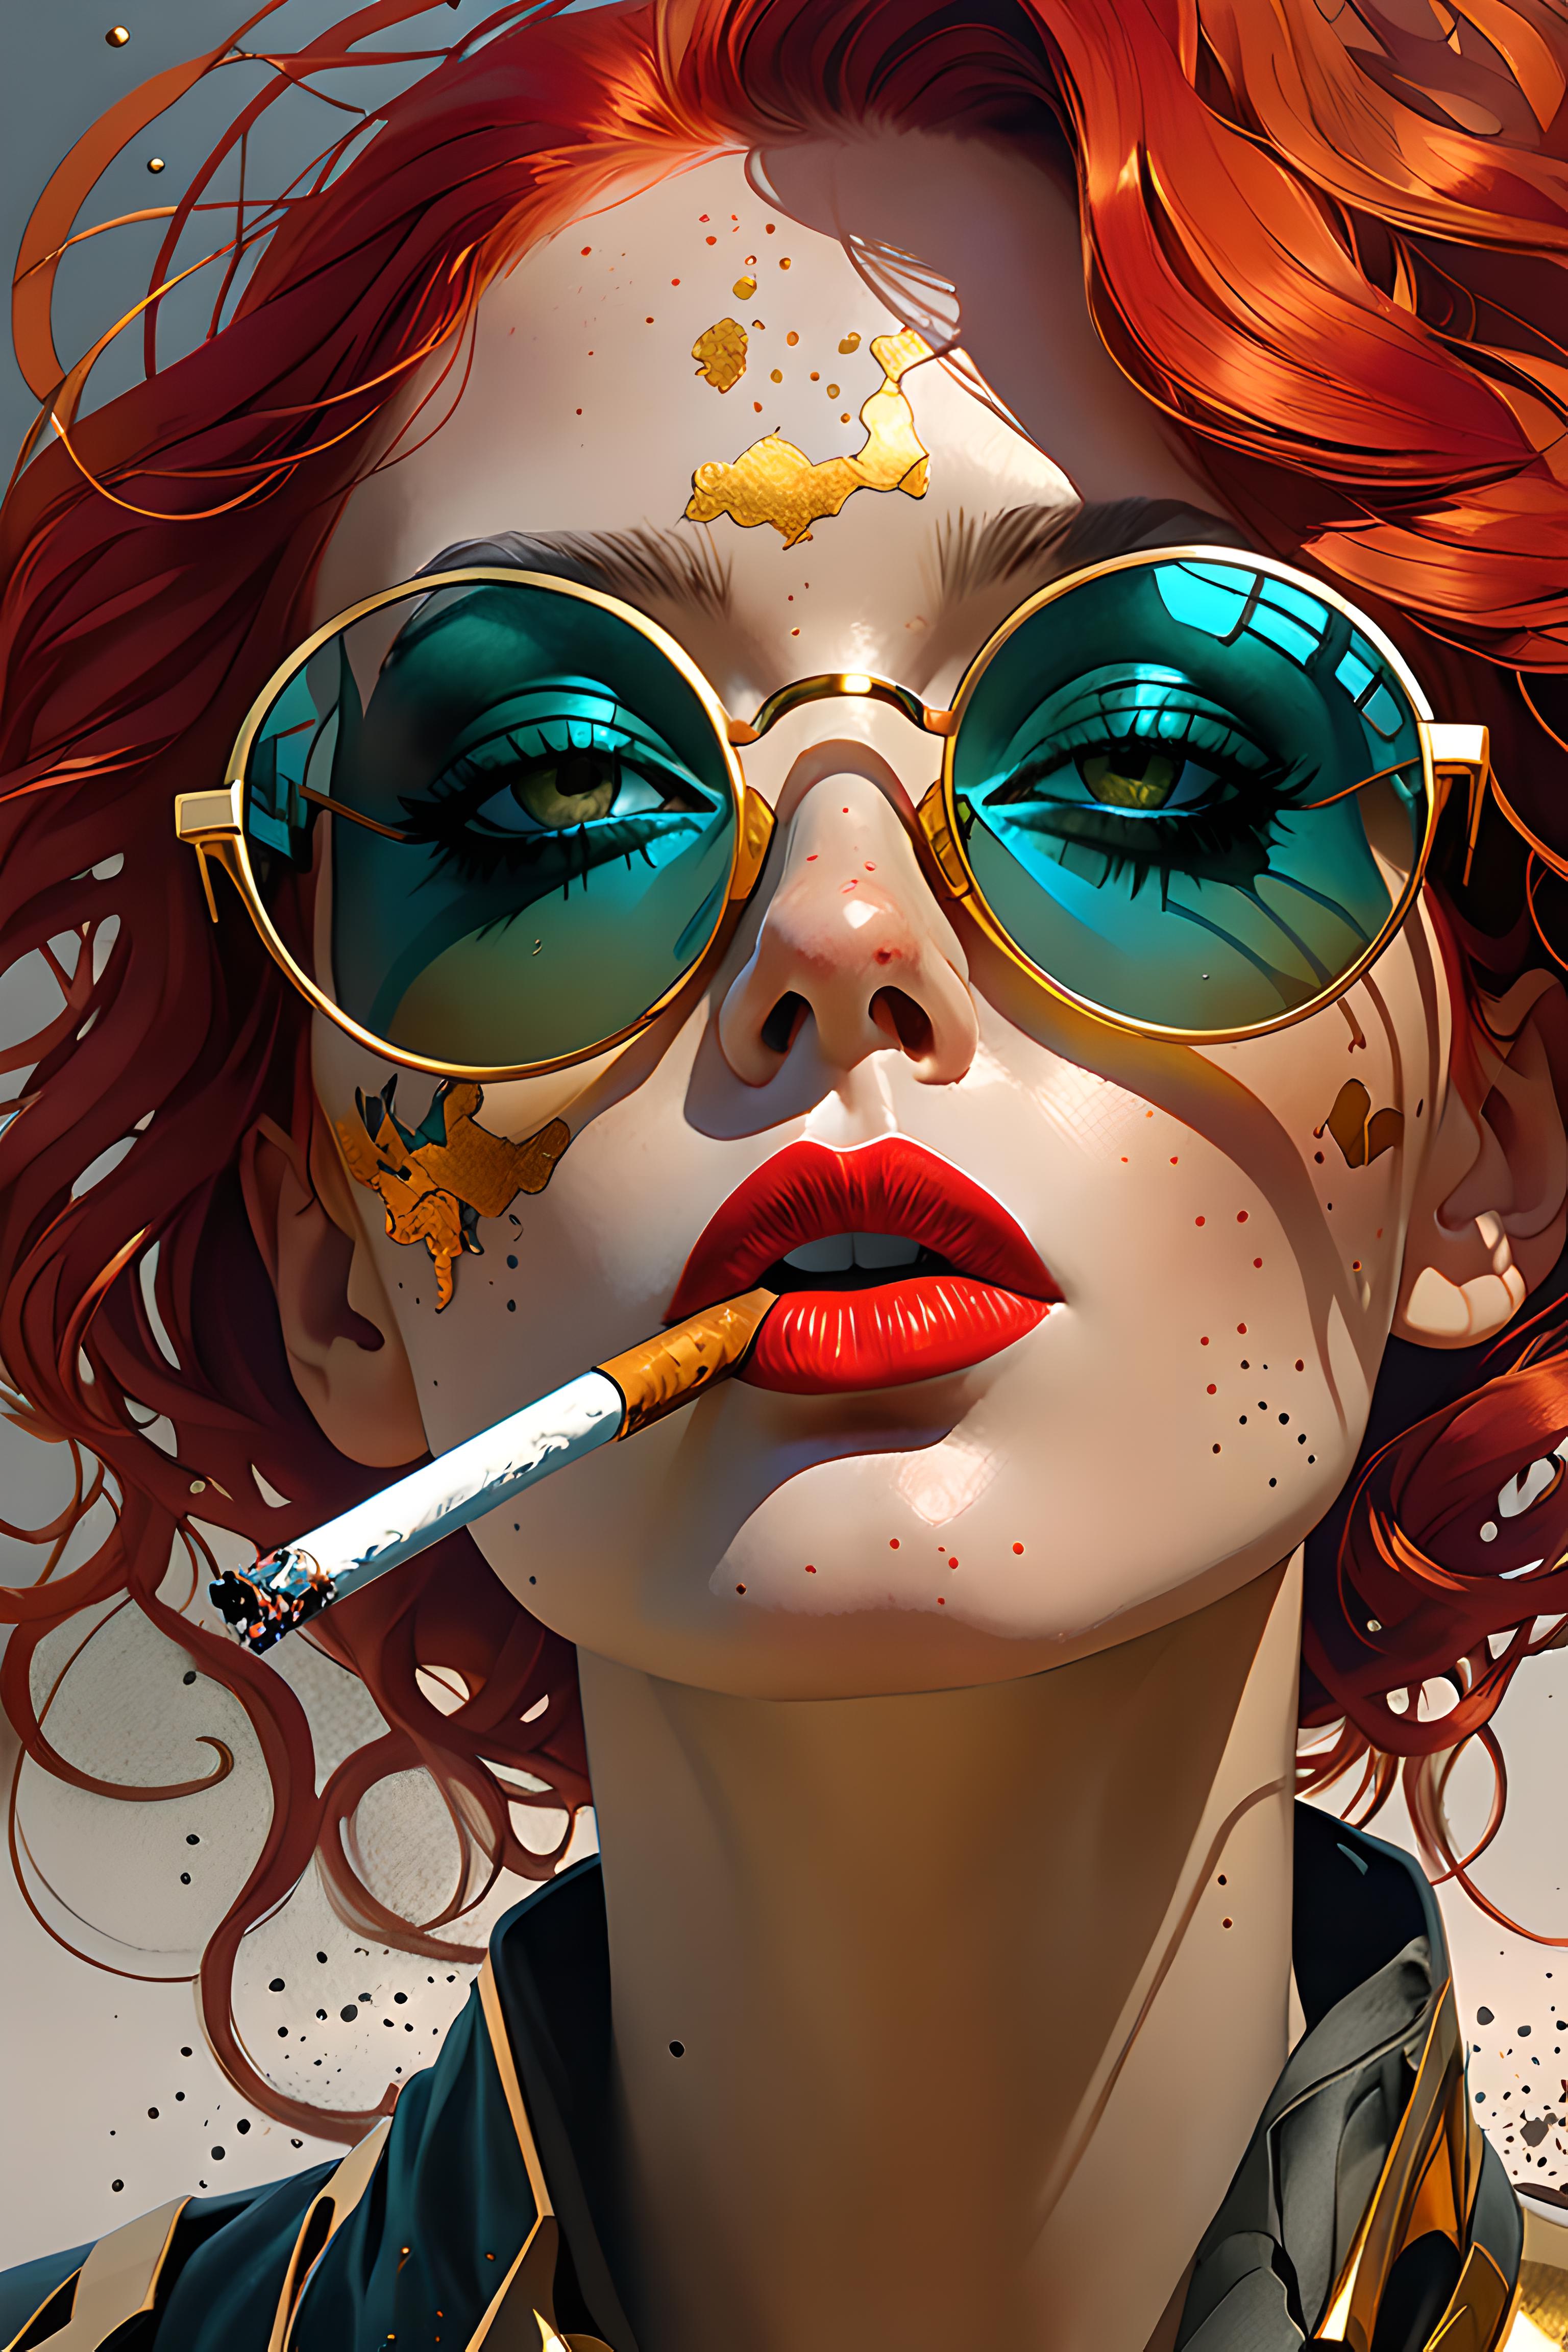 A woman with red hair and sunglasses smoking a cigarette.